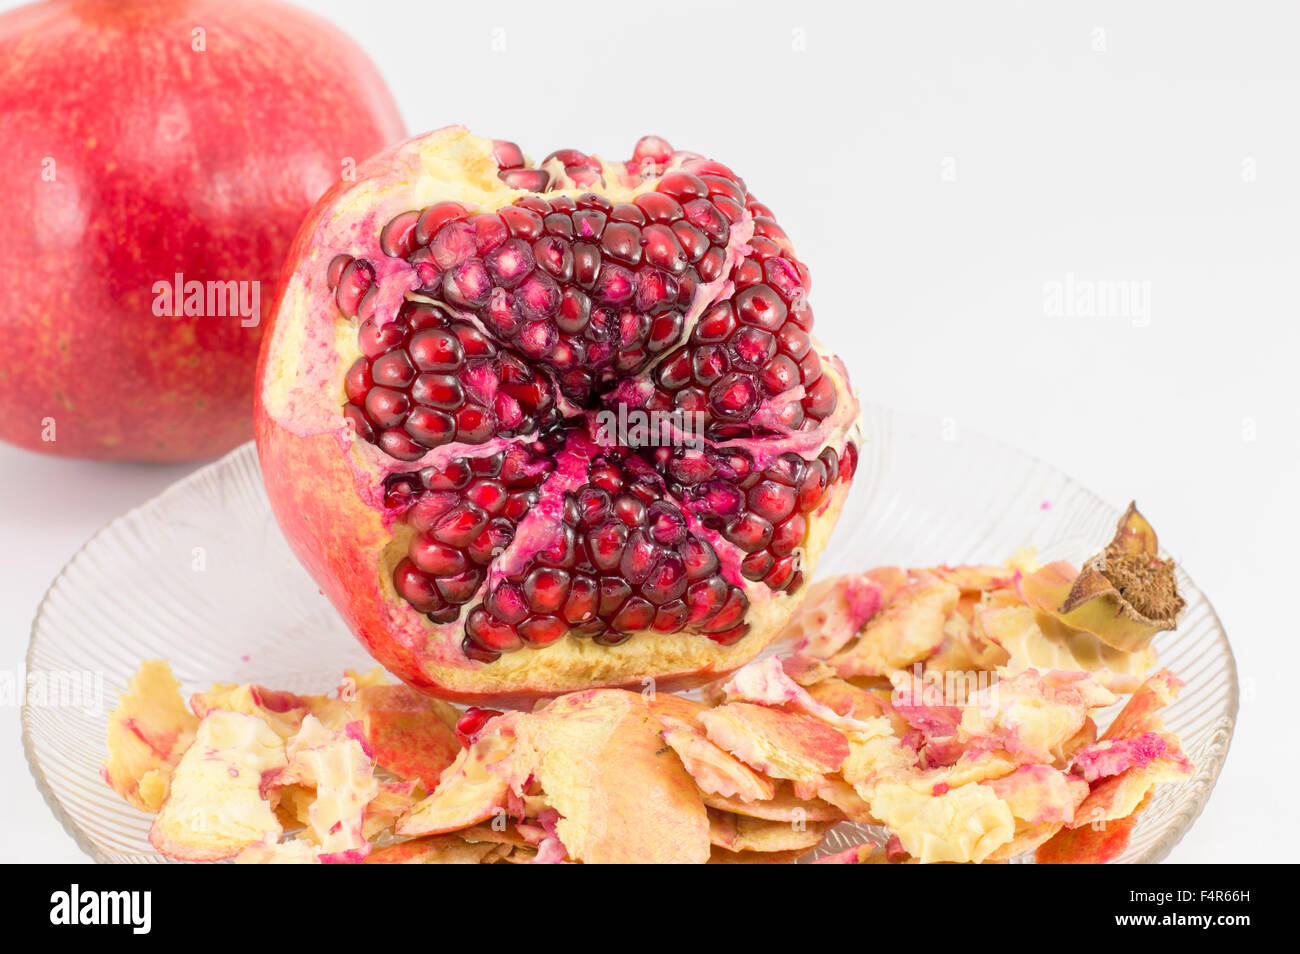 Juicy pomegranate partially peeled on a plate on white background Stock Photo